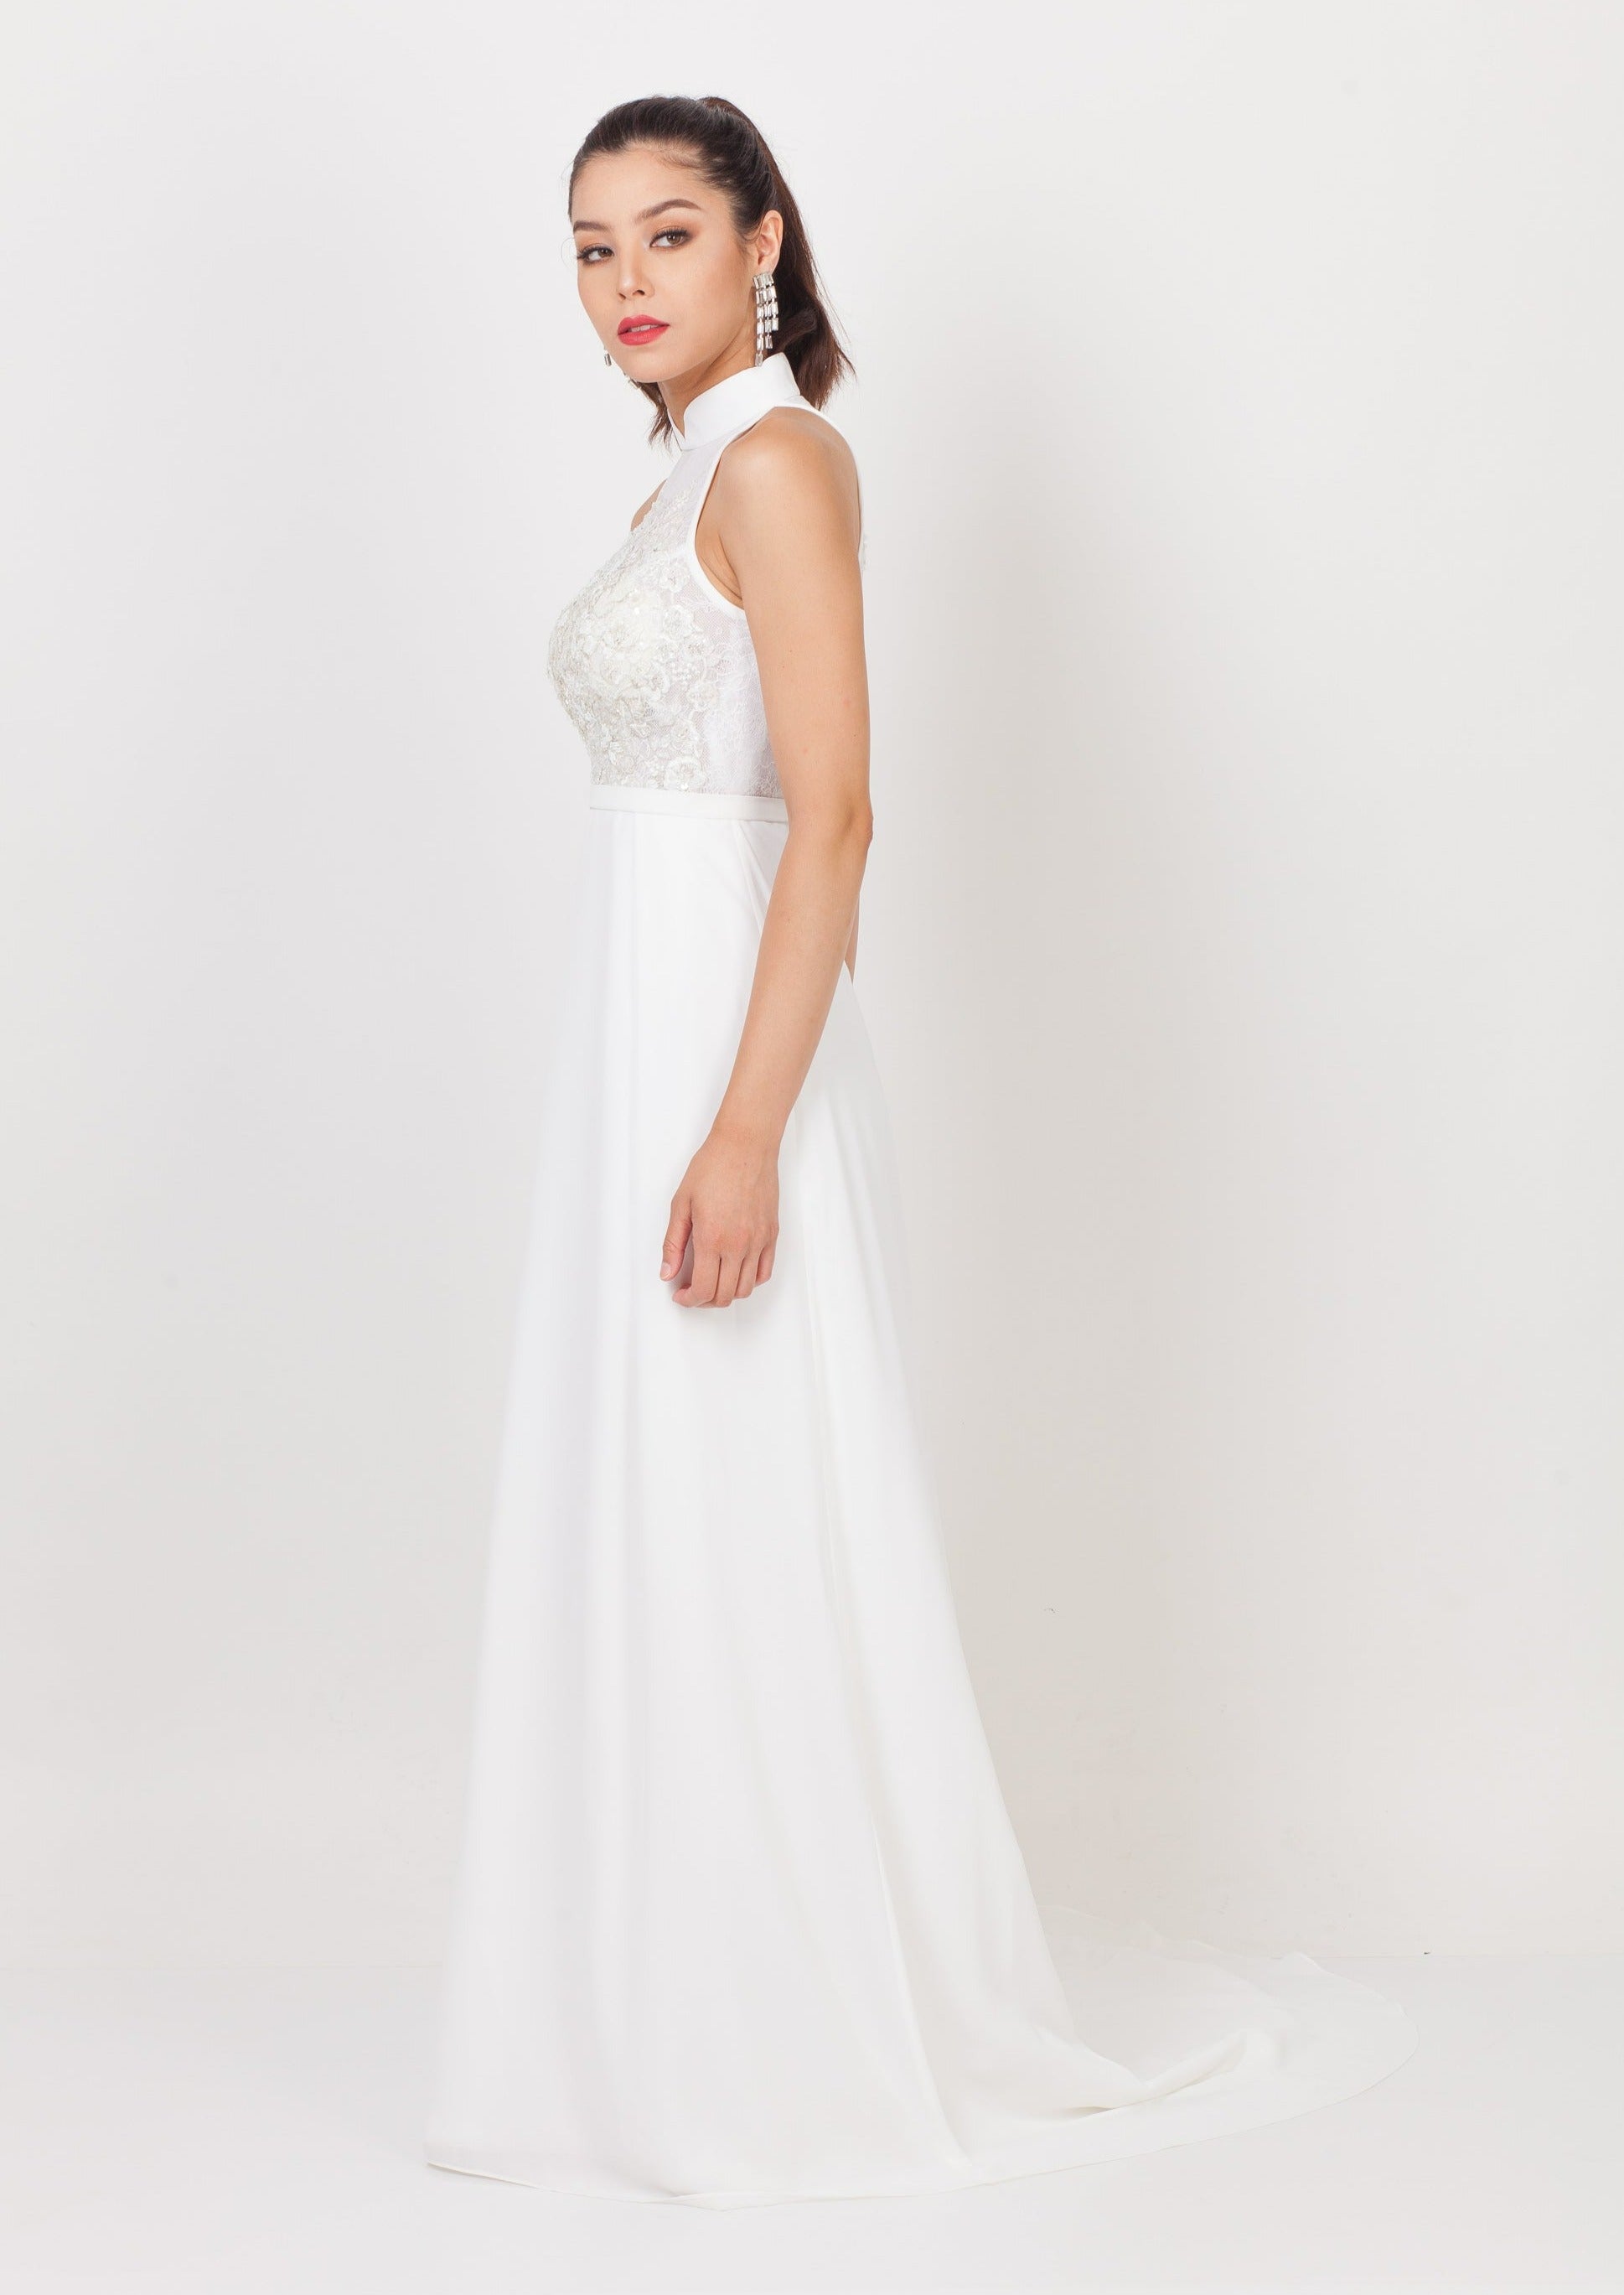 Qipology Hand Embroidered Bridal Qipao Gown